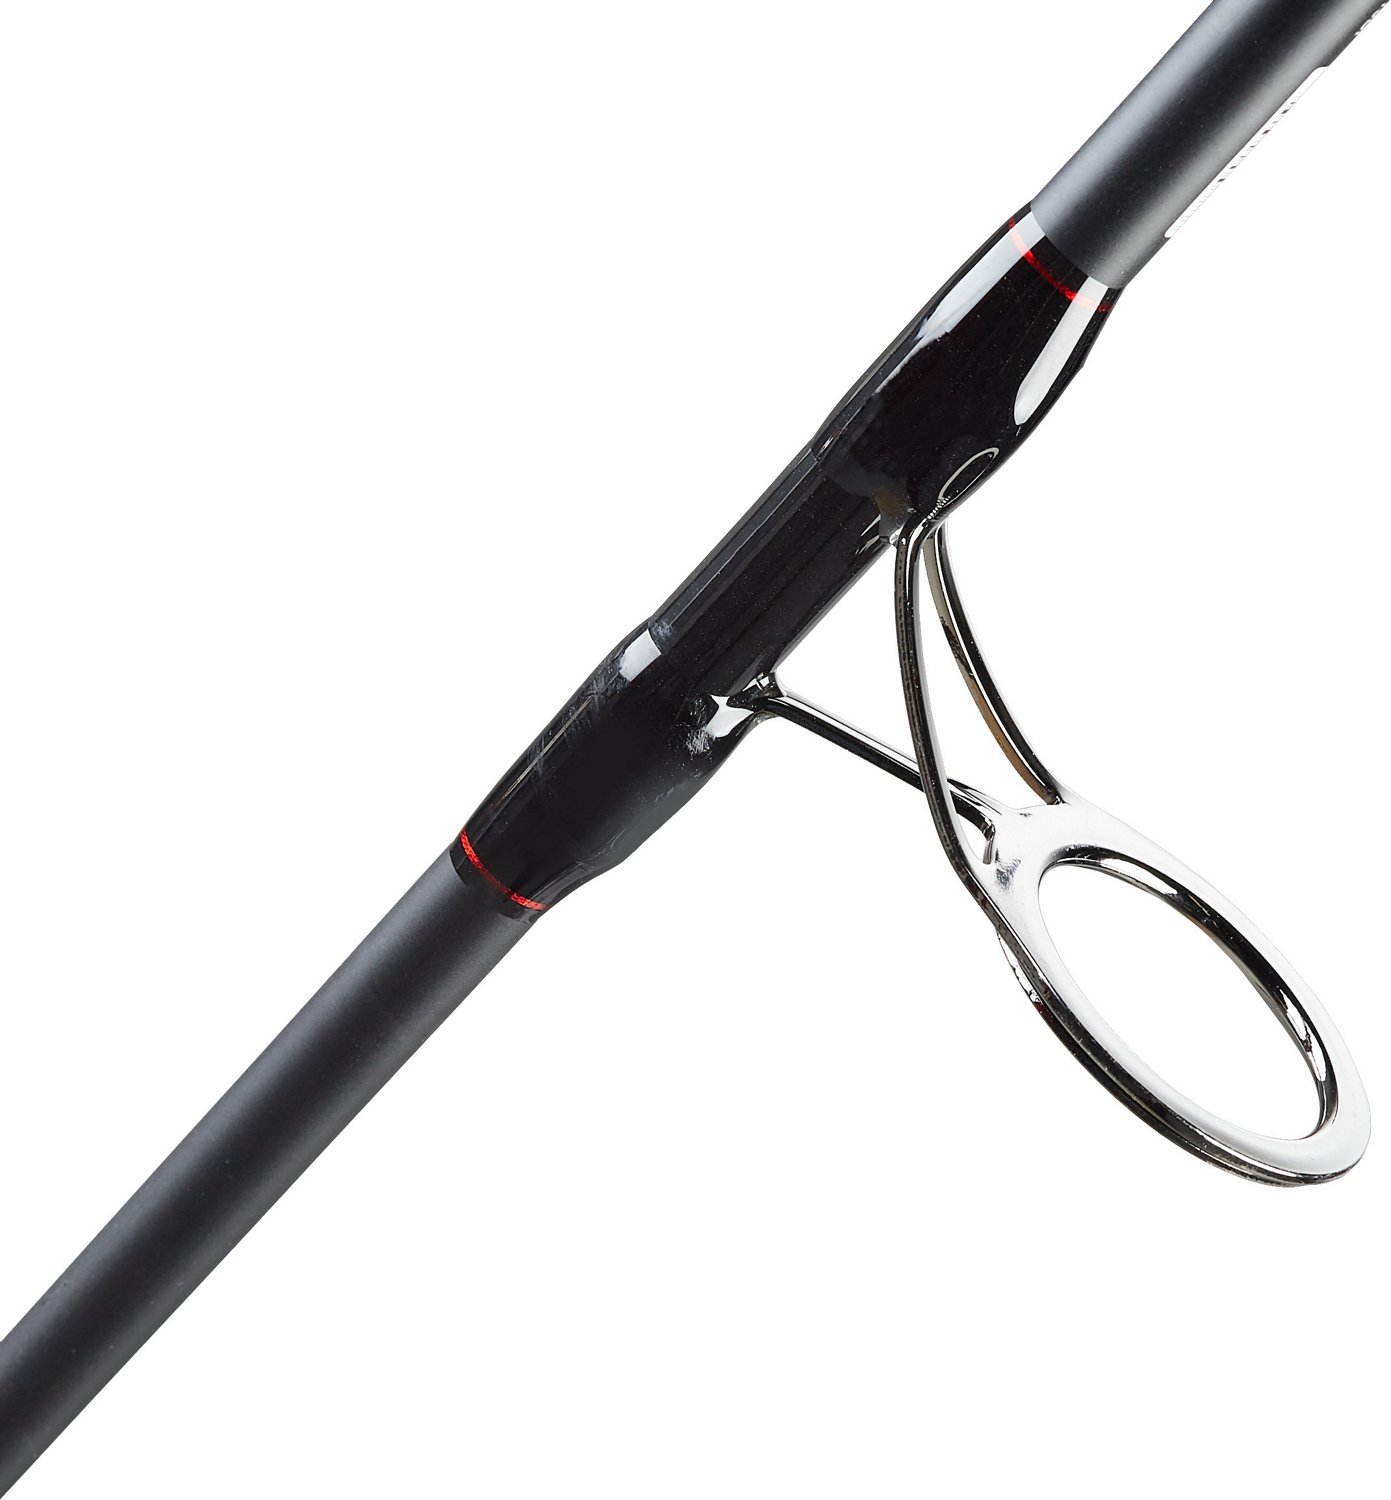 Ray & Anne's Tackle & Marine - Heavy Duty Surf Combo - Not $449 - Only $349  - Save $100!  surf-combos-spin-and-overhead/penn-prevail-ll-12ft-15-to-37kg-surf-combo-with-penn-battle-lll-8000h